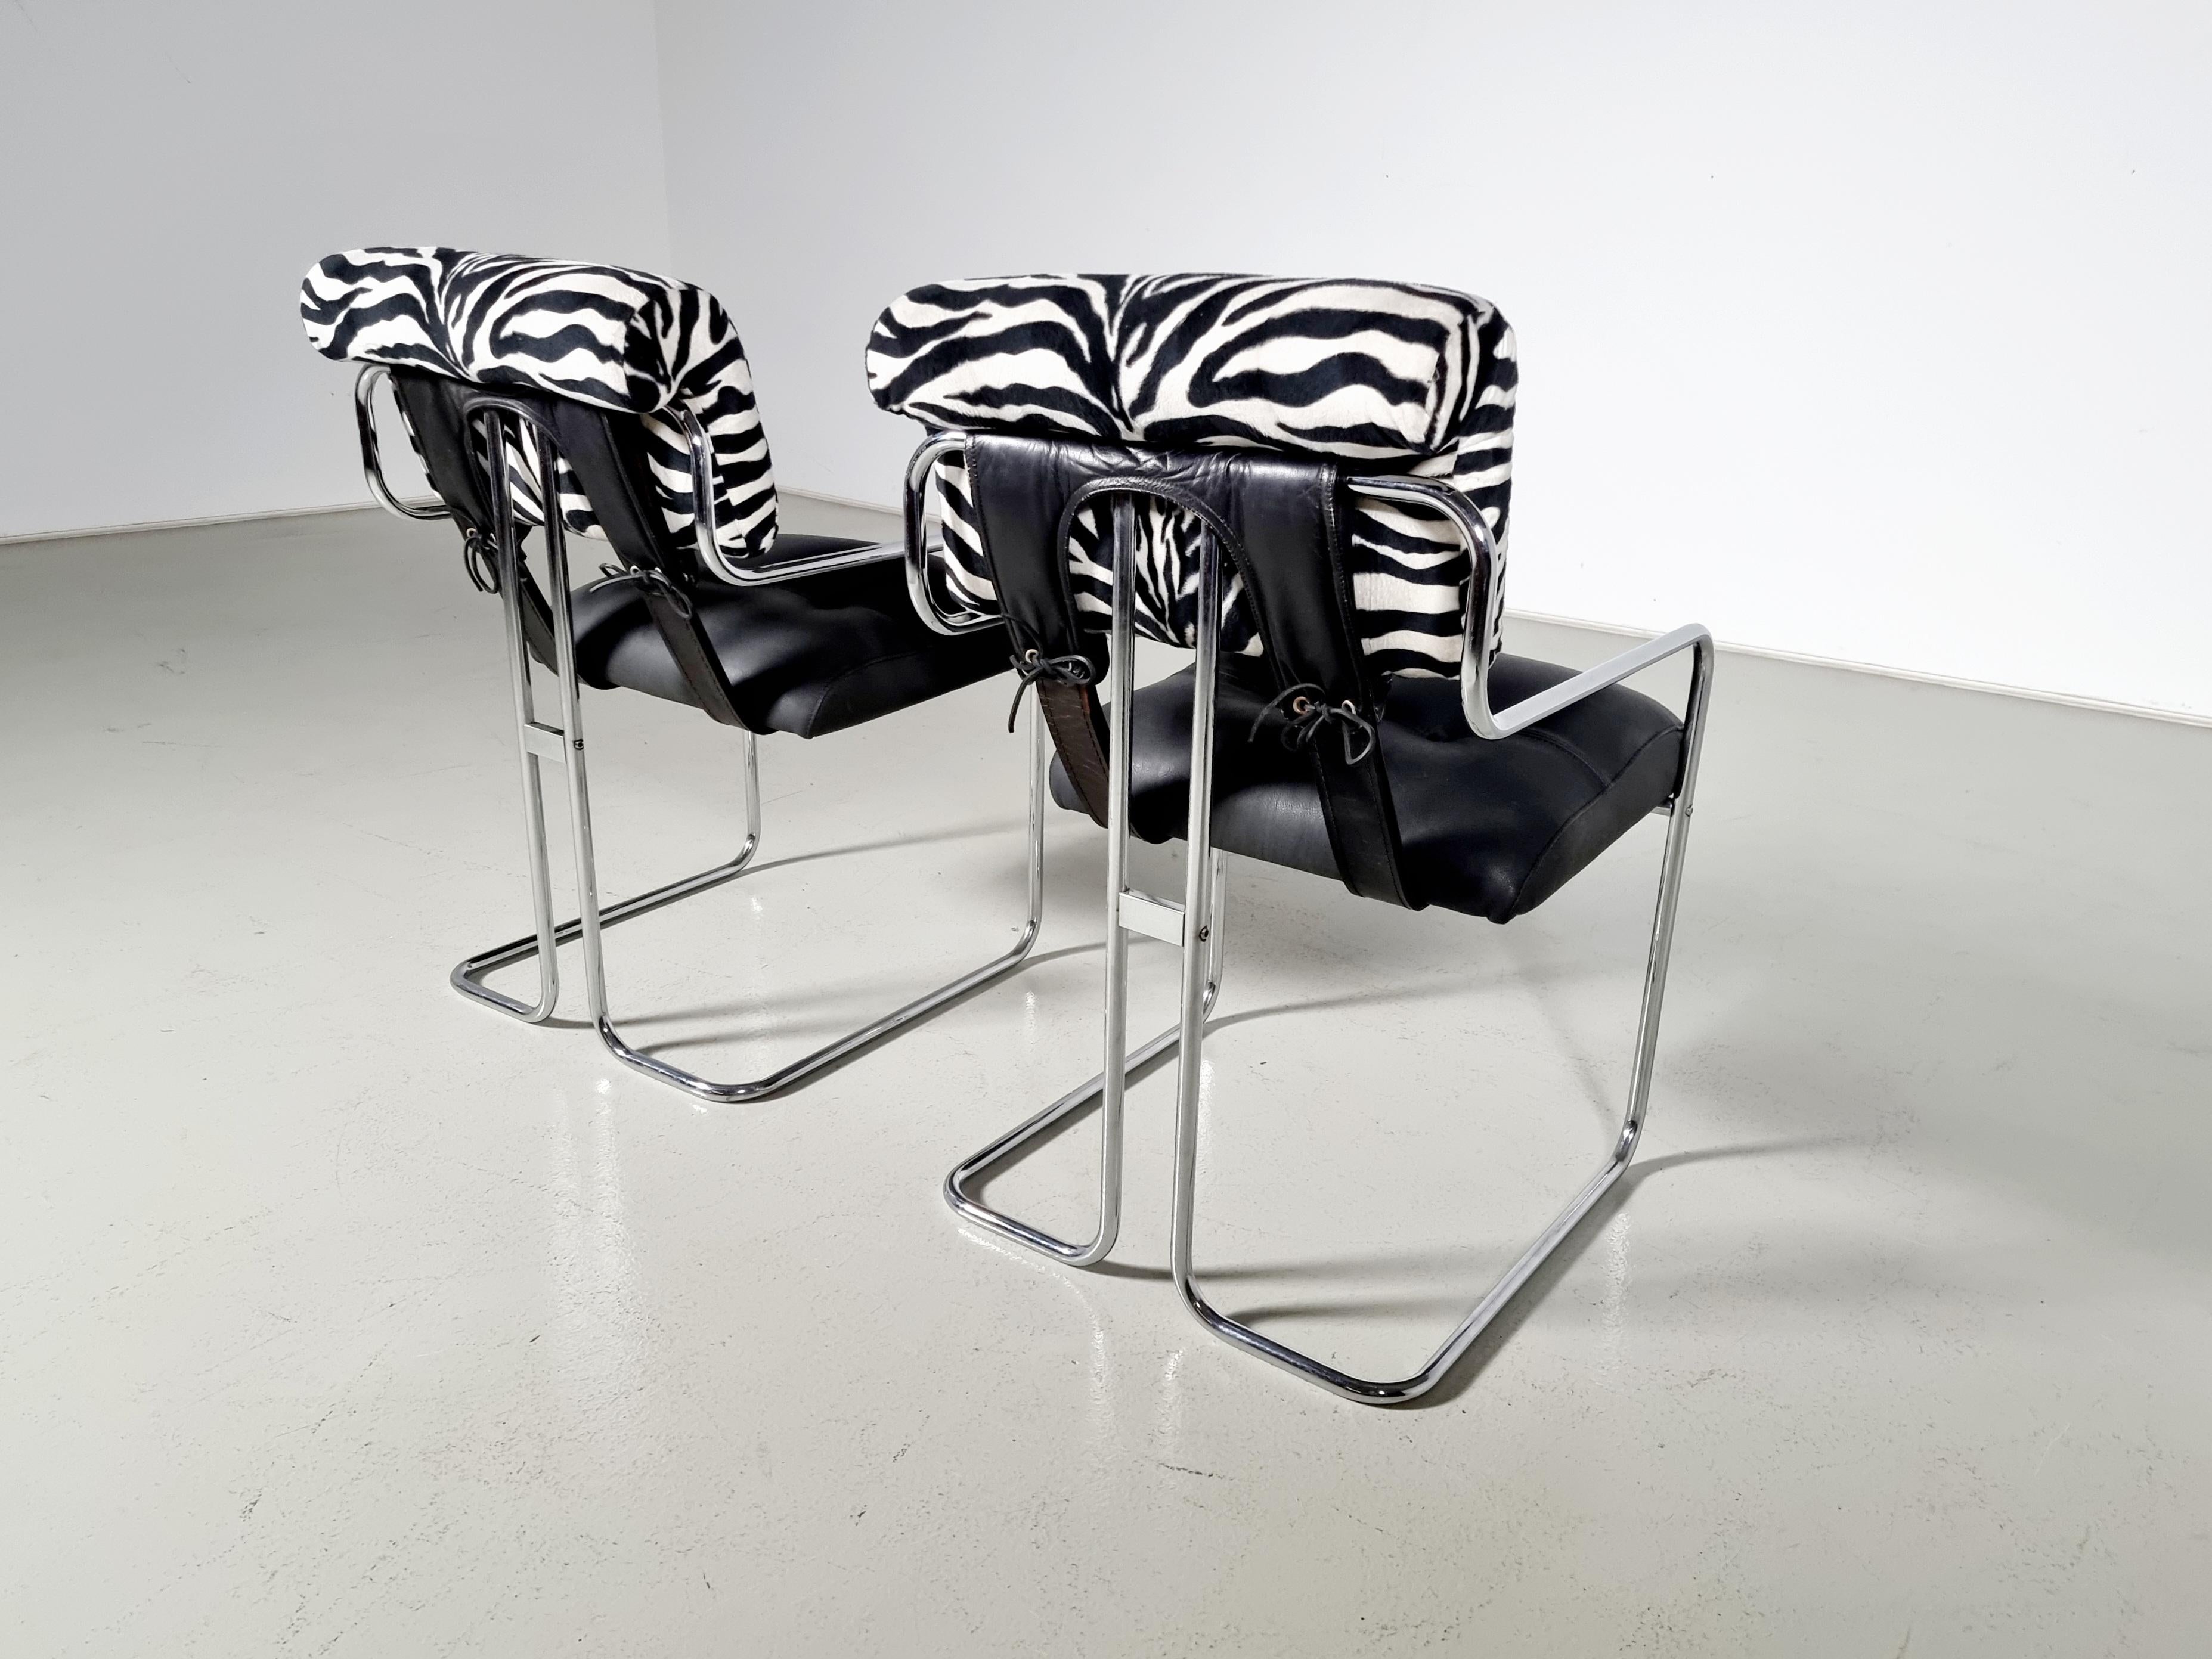 Set of 2 black leather, zebra fabric, and chrome chairs designed by Guido Faleschini for Mariani, Pace collection. The leather and fabric upholstery is attached to graceful polished steel tubular frames, as well as is bridged together by leather